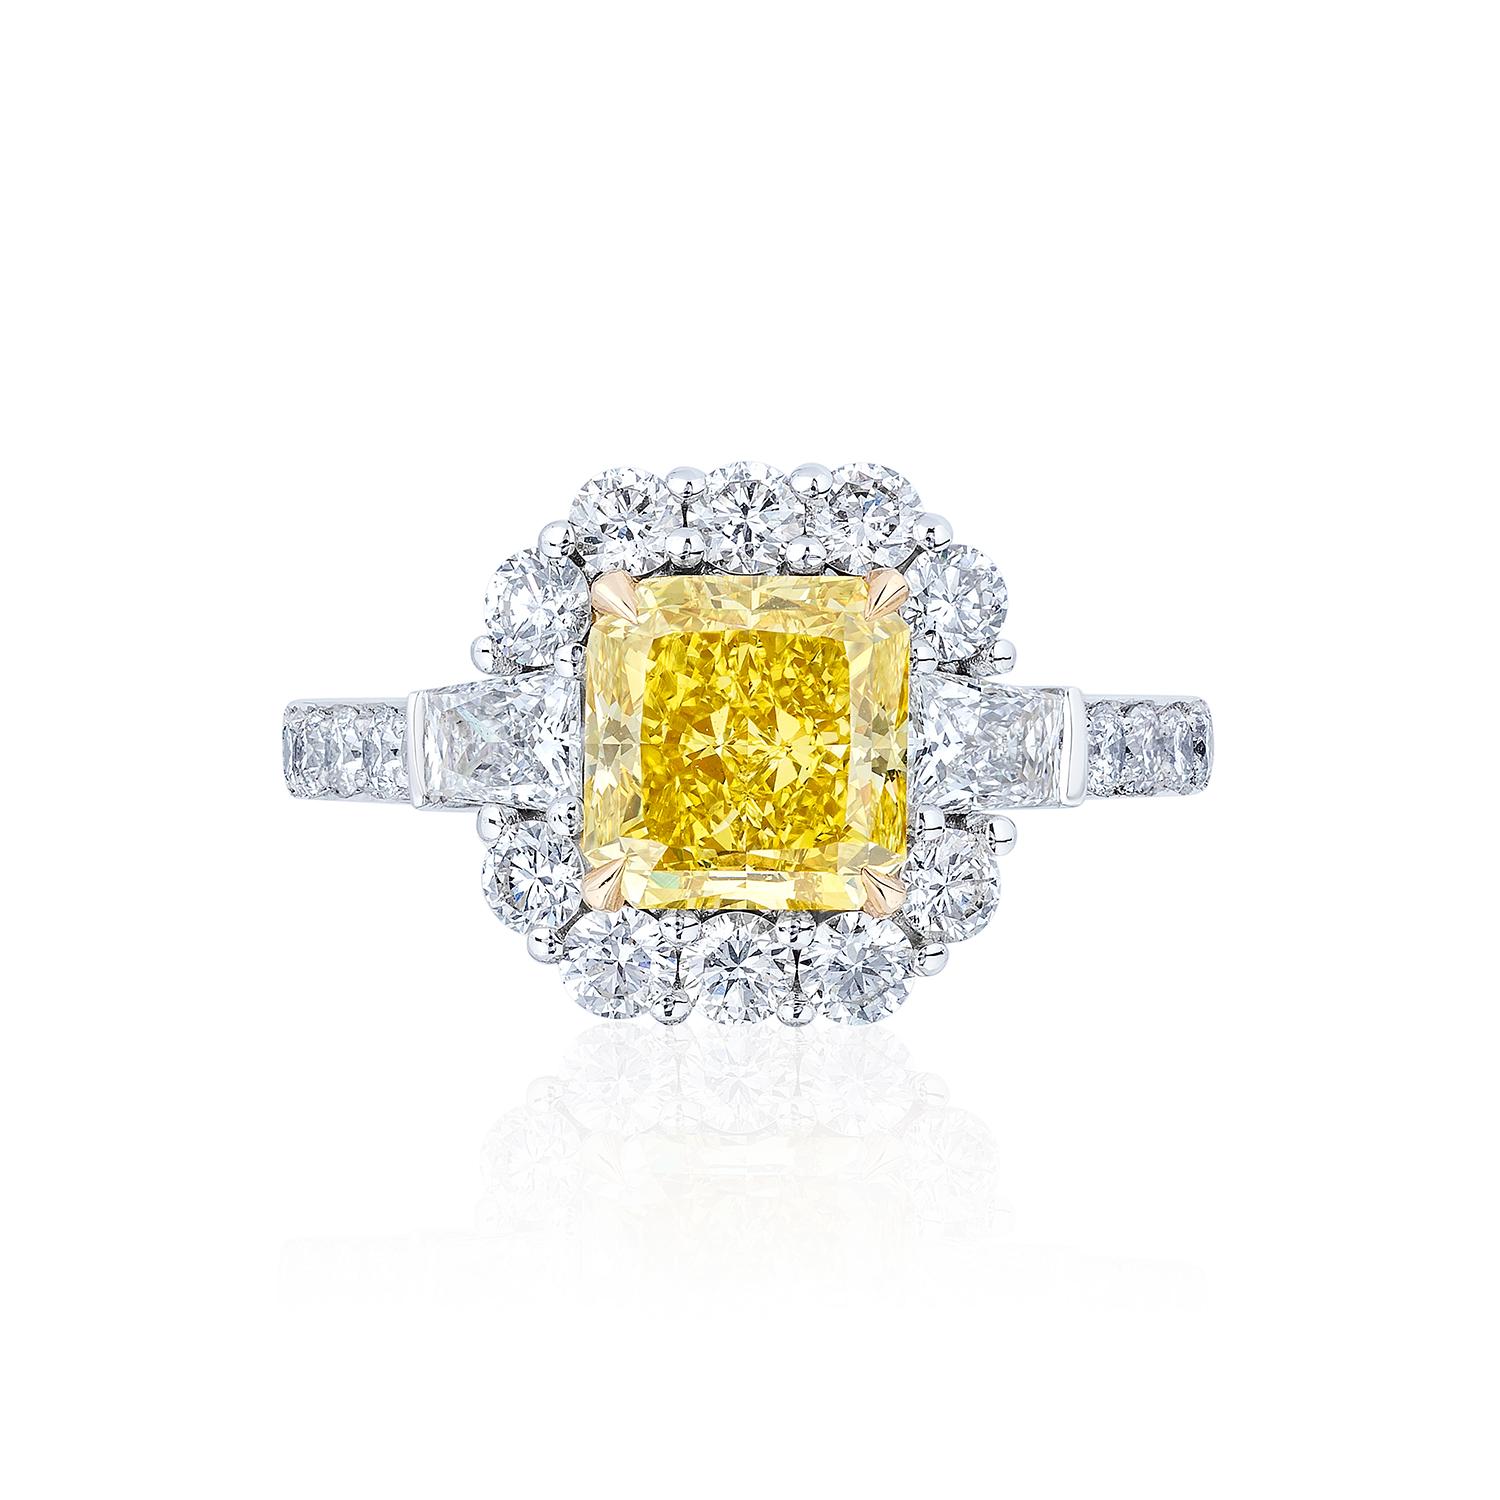 Radiant Cut GIA Certified 2.38 Carat Fancy Vivid Yellow Diamond Ring For Sale